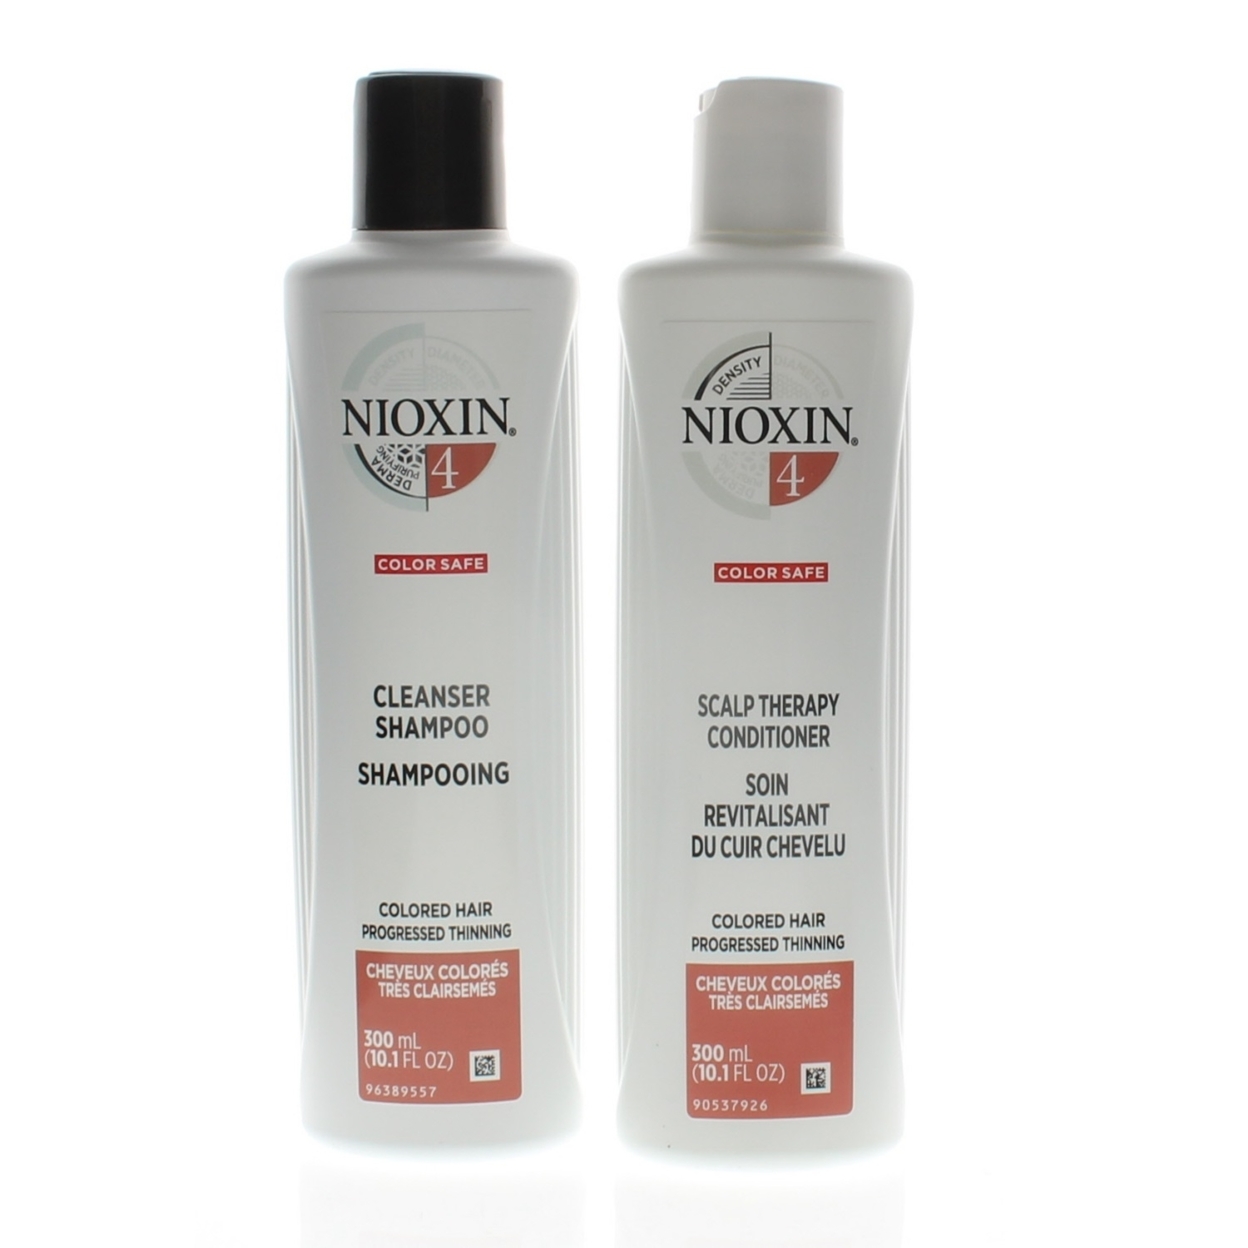 Nioxin System 4 Cleanser Shampoo + Scalp Therapy Conditioner 2 X 10.1oz Combo